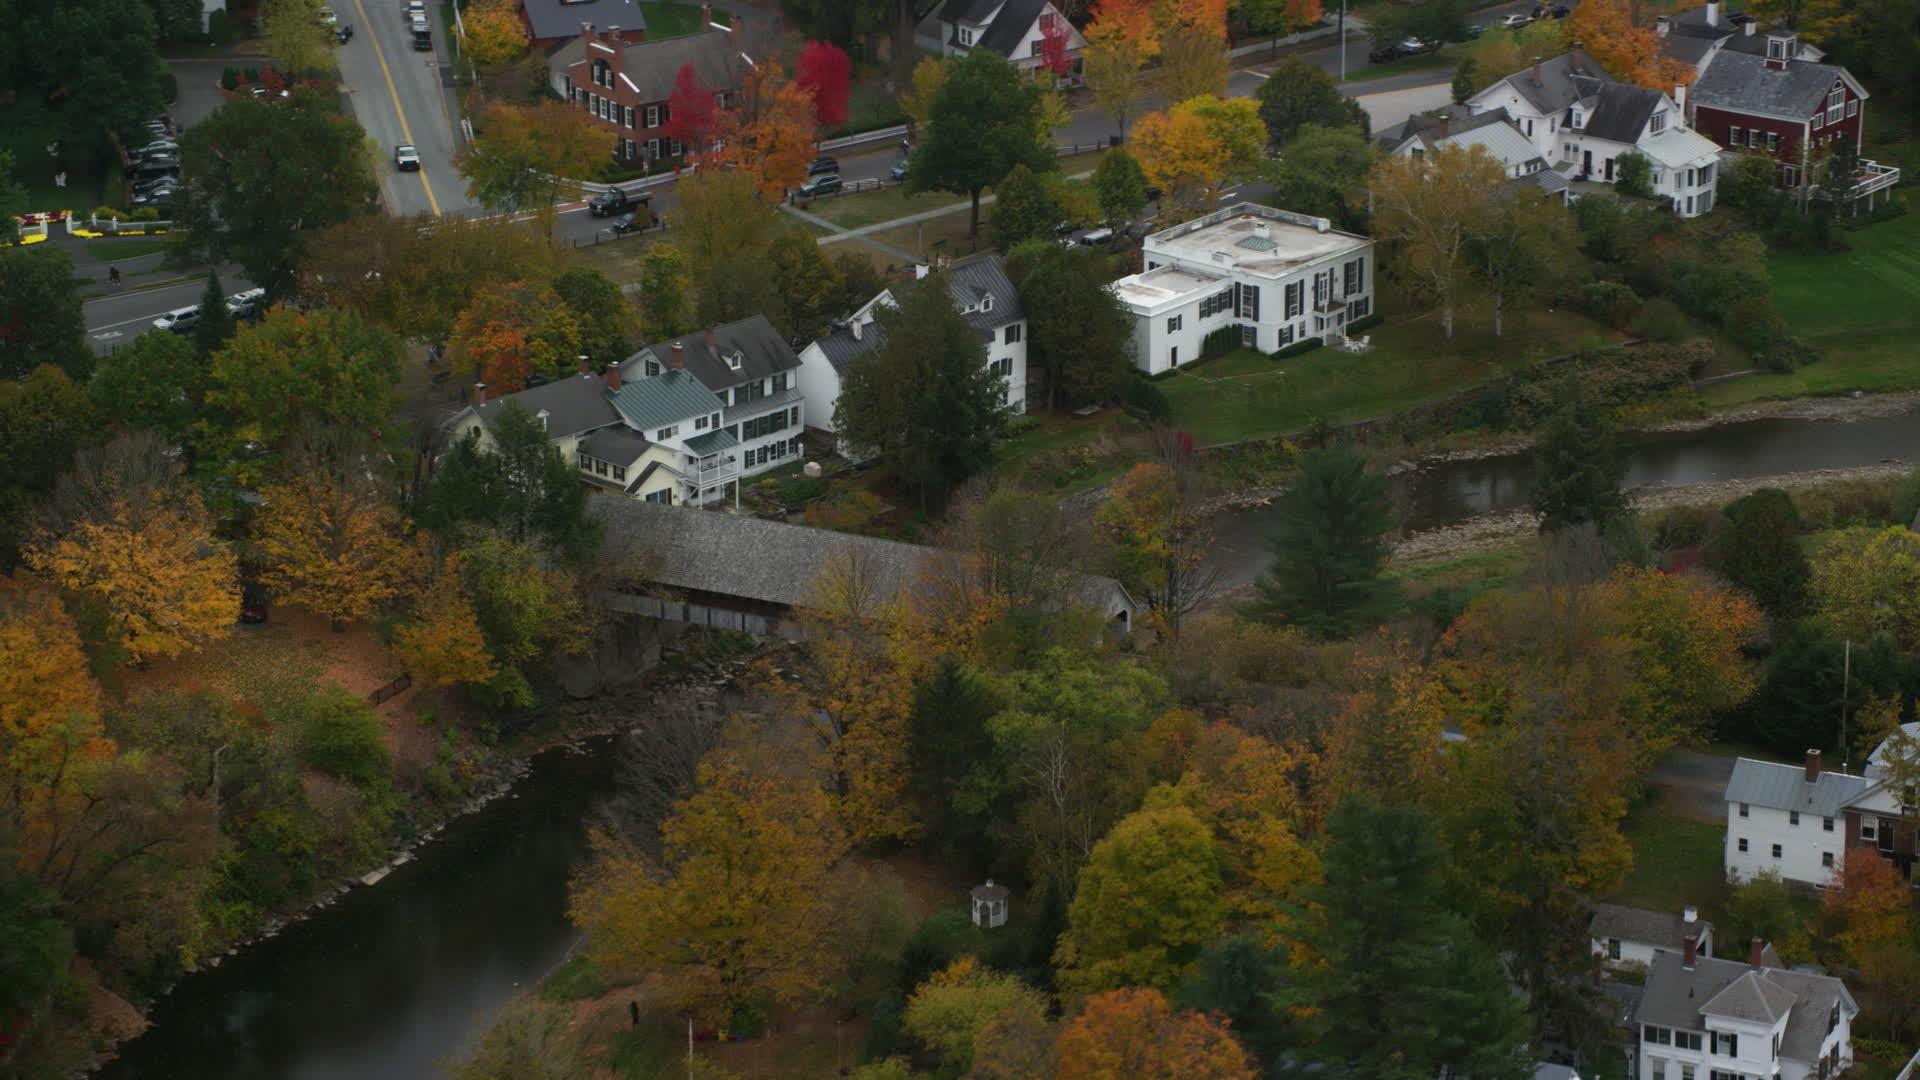 6K stock footage aerial video orbiting a small covered bridge, Ottauquechee River, autumn, Woodstock, Vermont Aerial Stock Footage AX151_020. Axiom